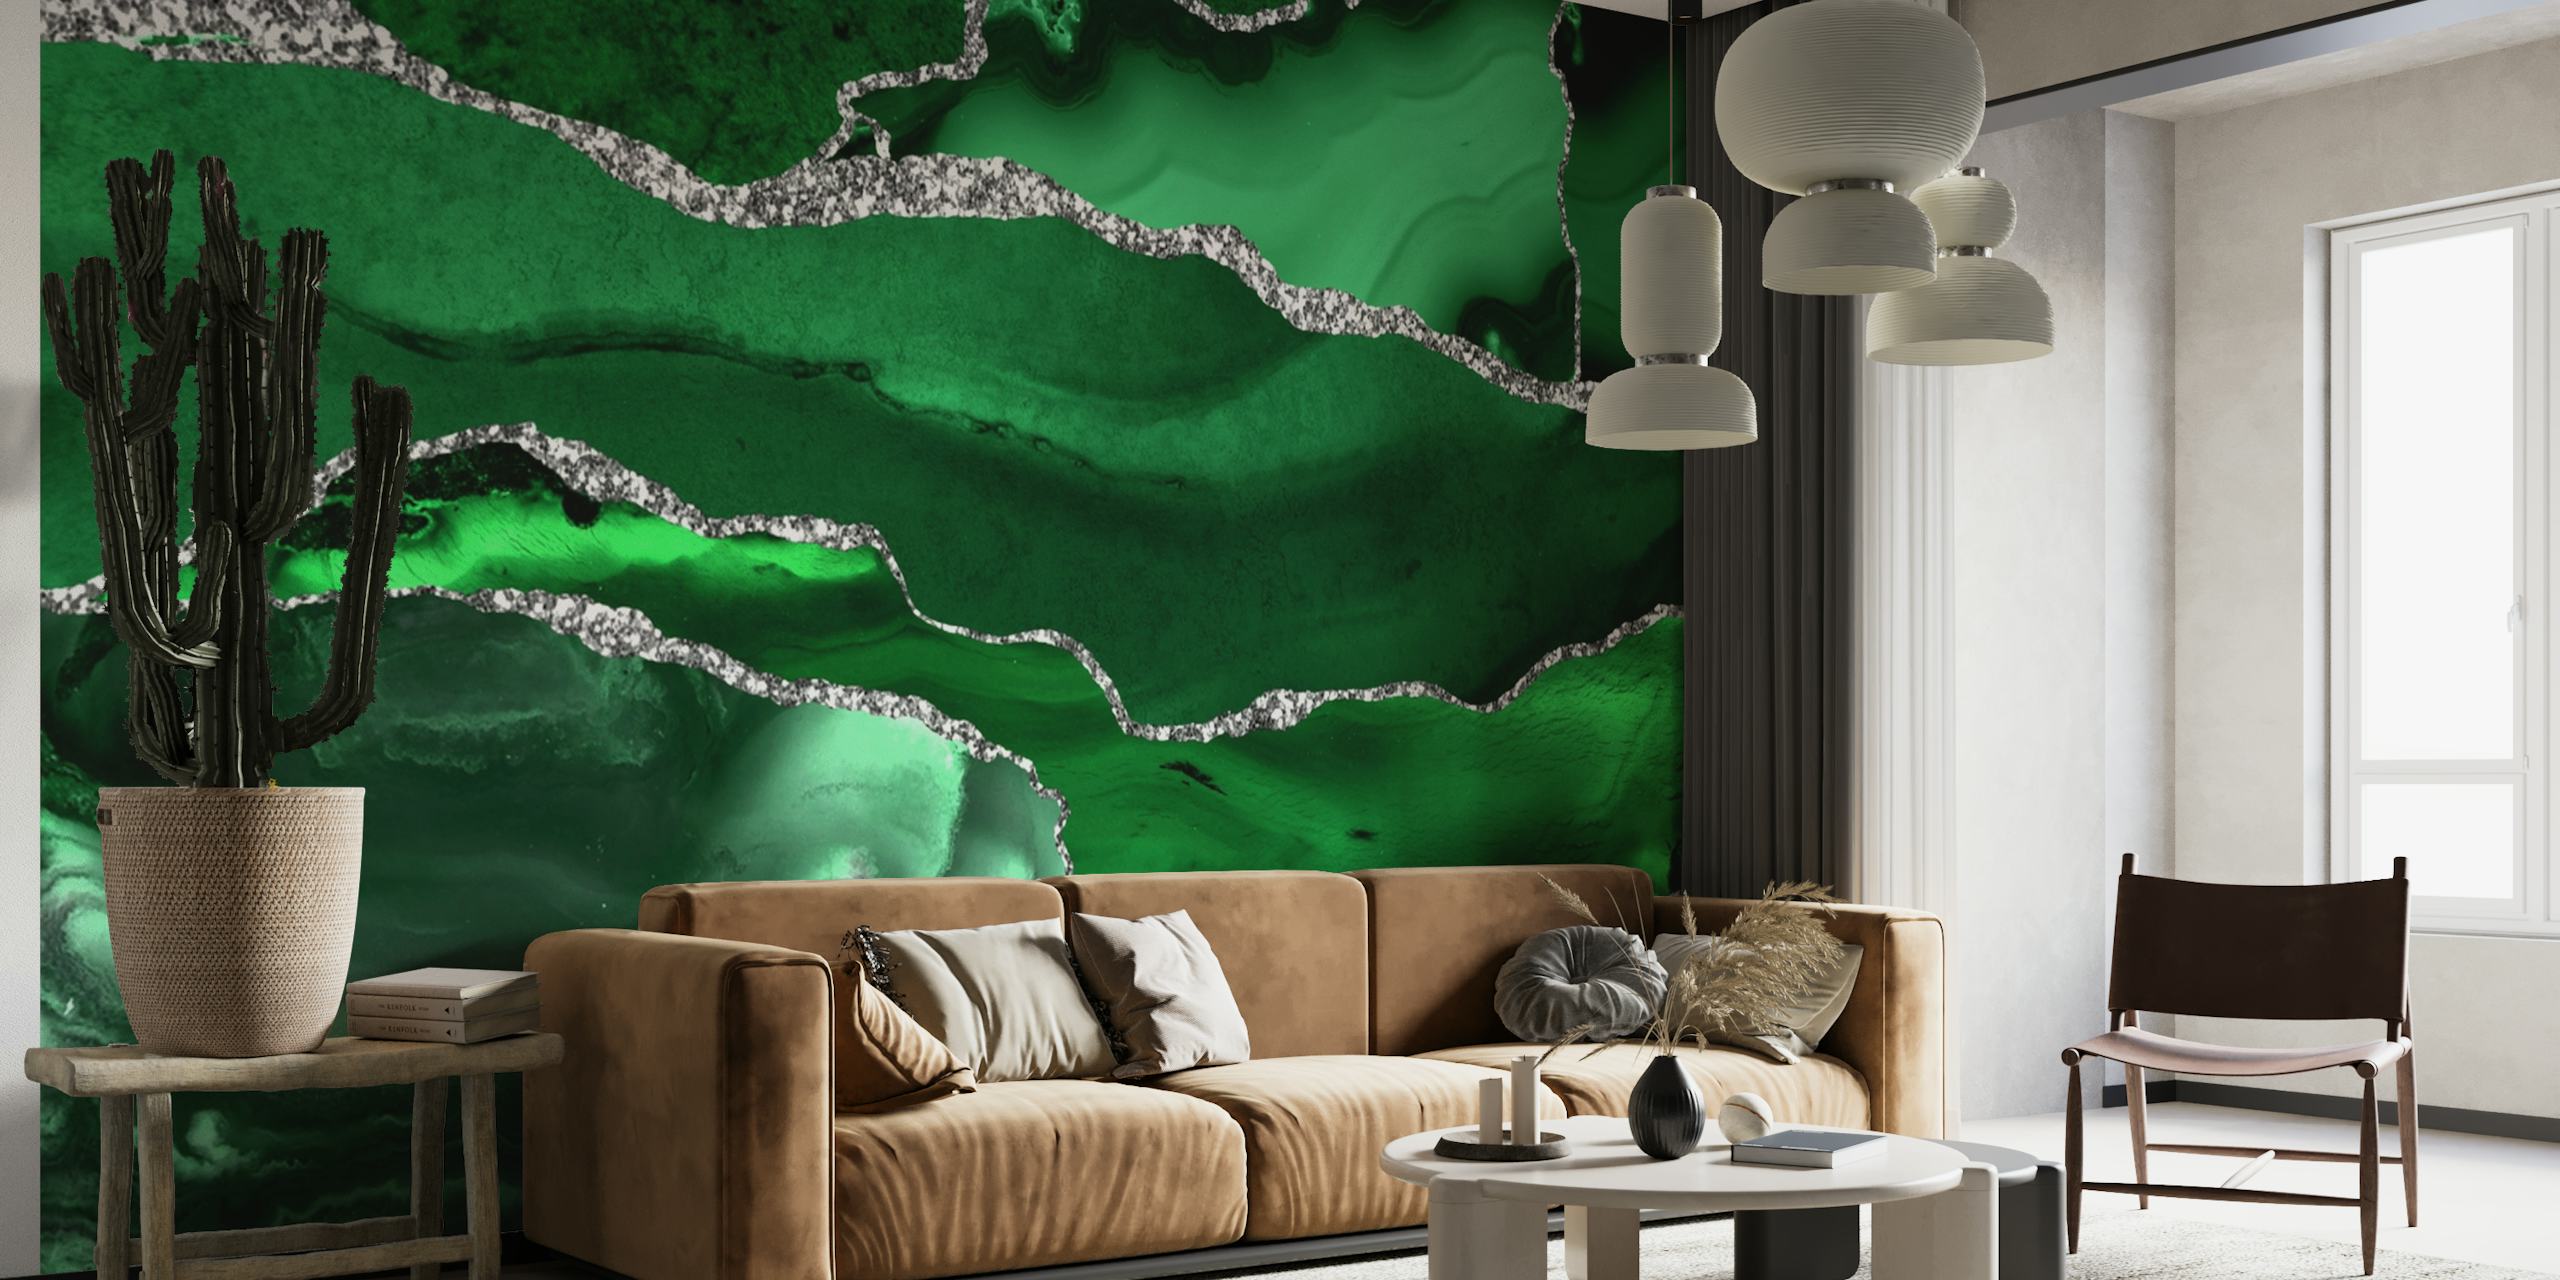 Emerald Green Marble Mosaic wall mural with silver veins